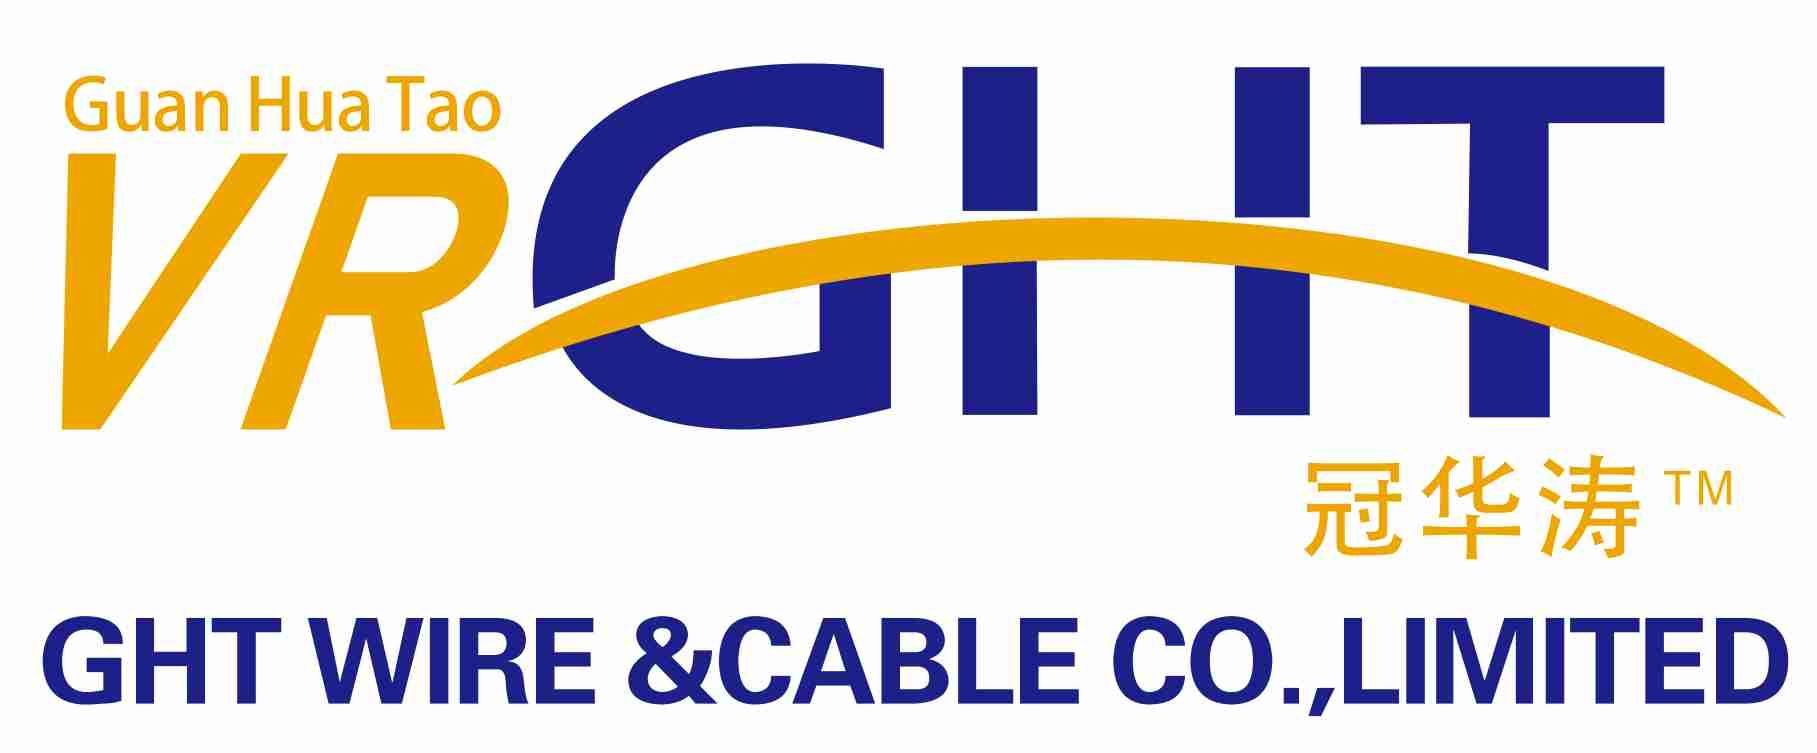 GHT WIRE & CABLE CO.,LIMITED logo